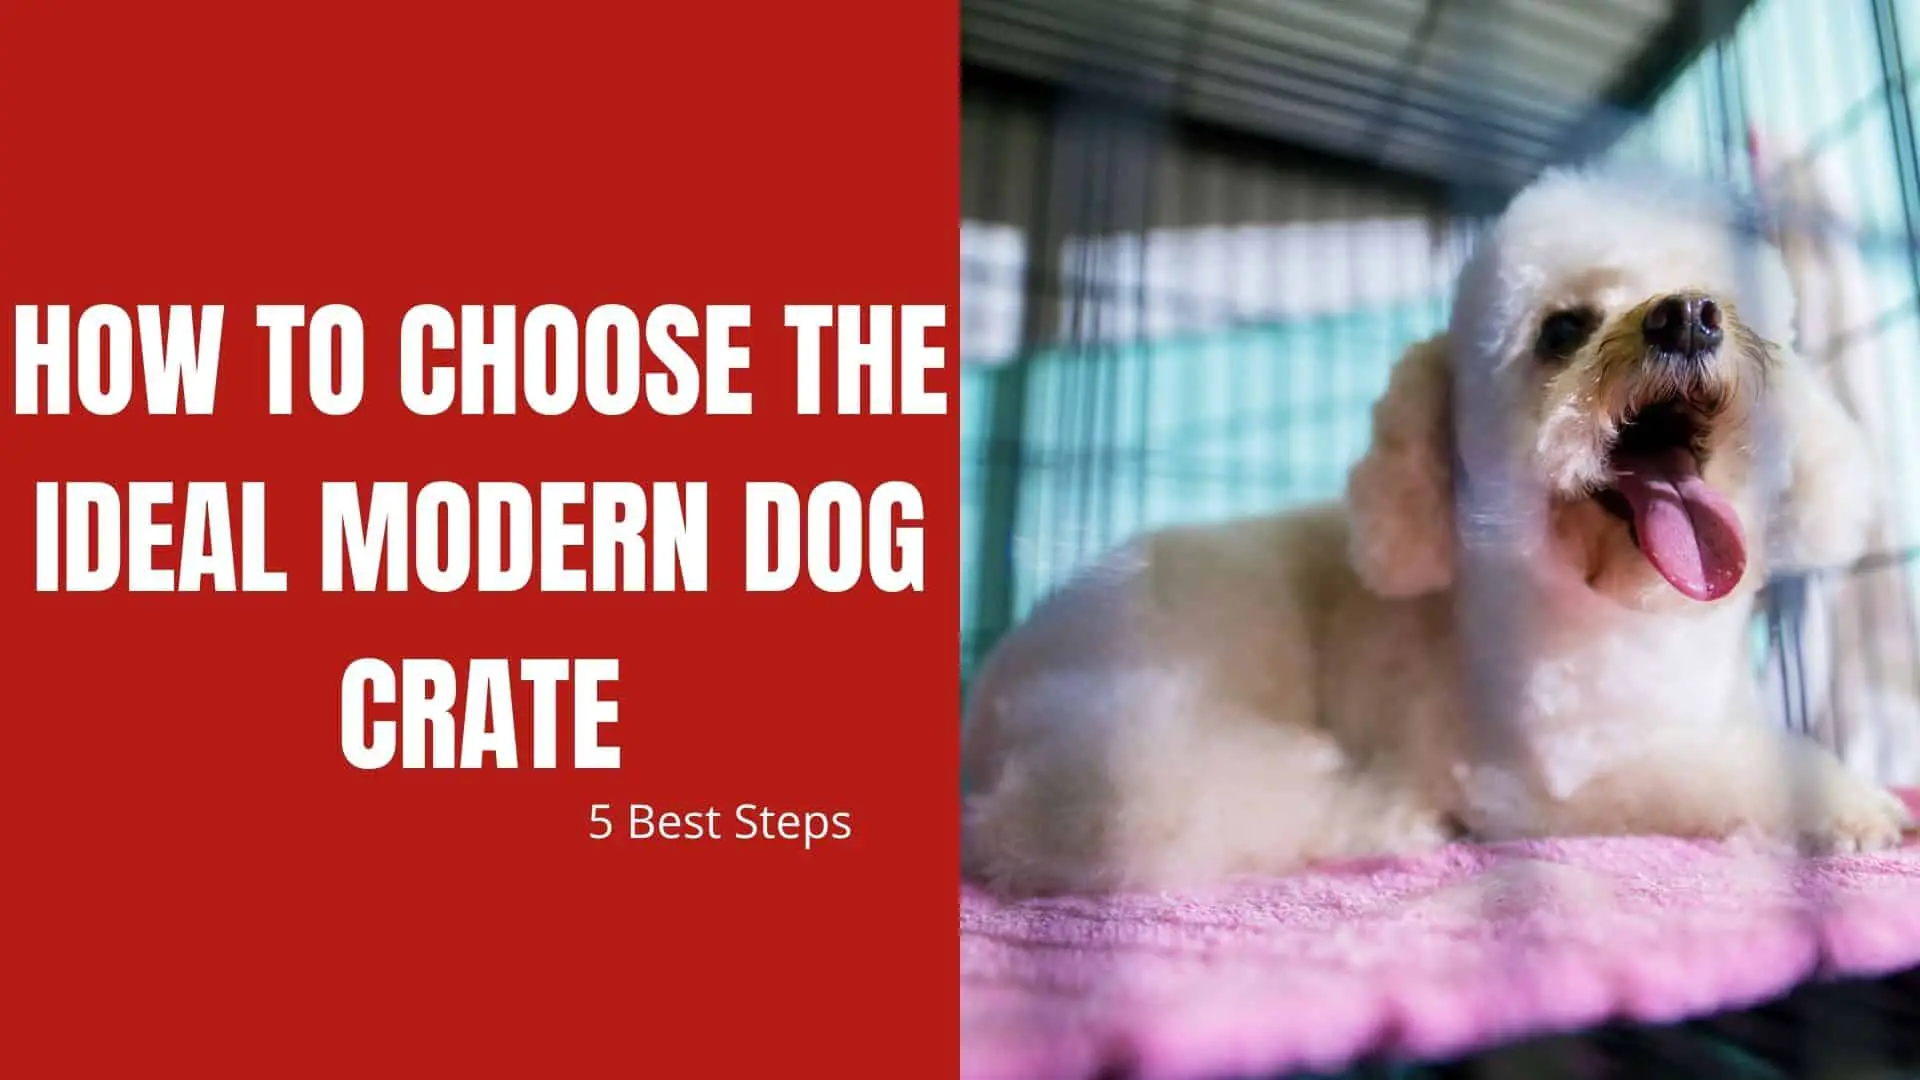 How to Choose the Ideal Modern Dog Crate – 5 Best Steps